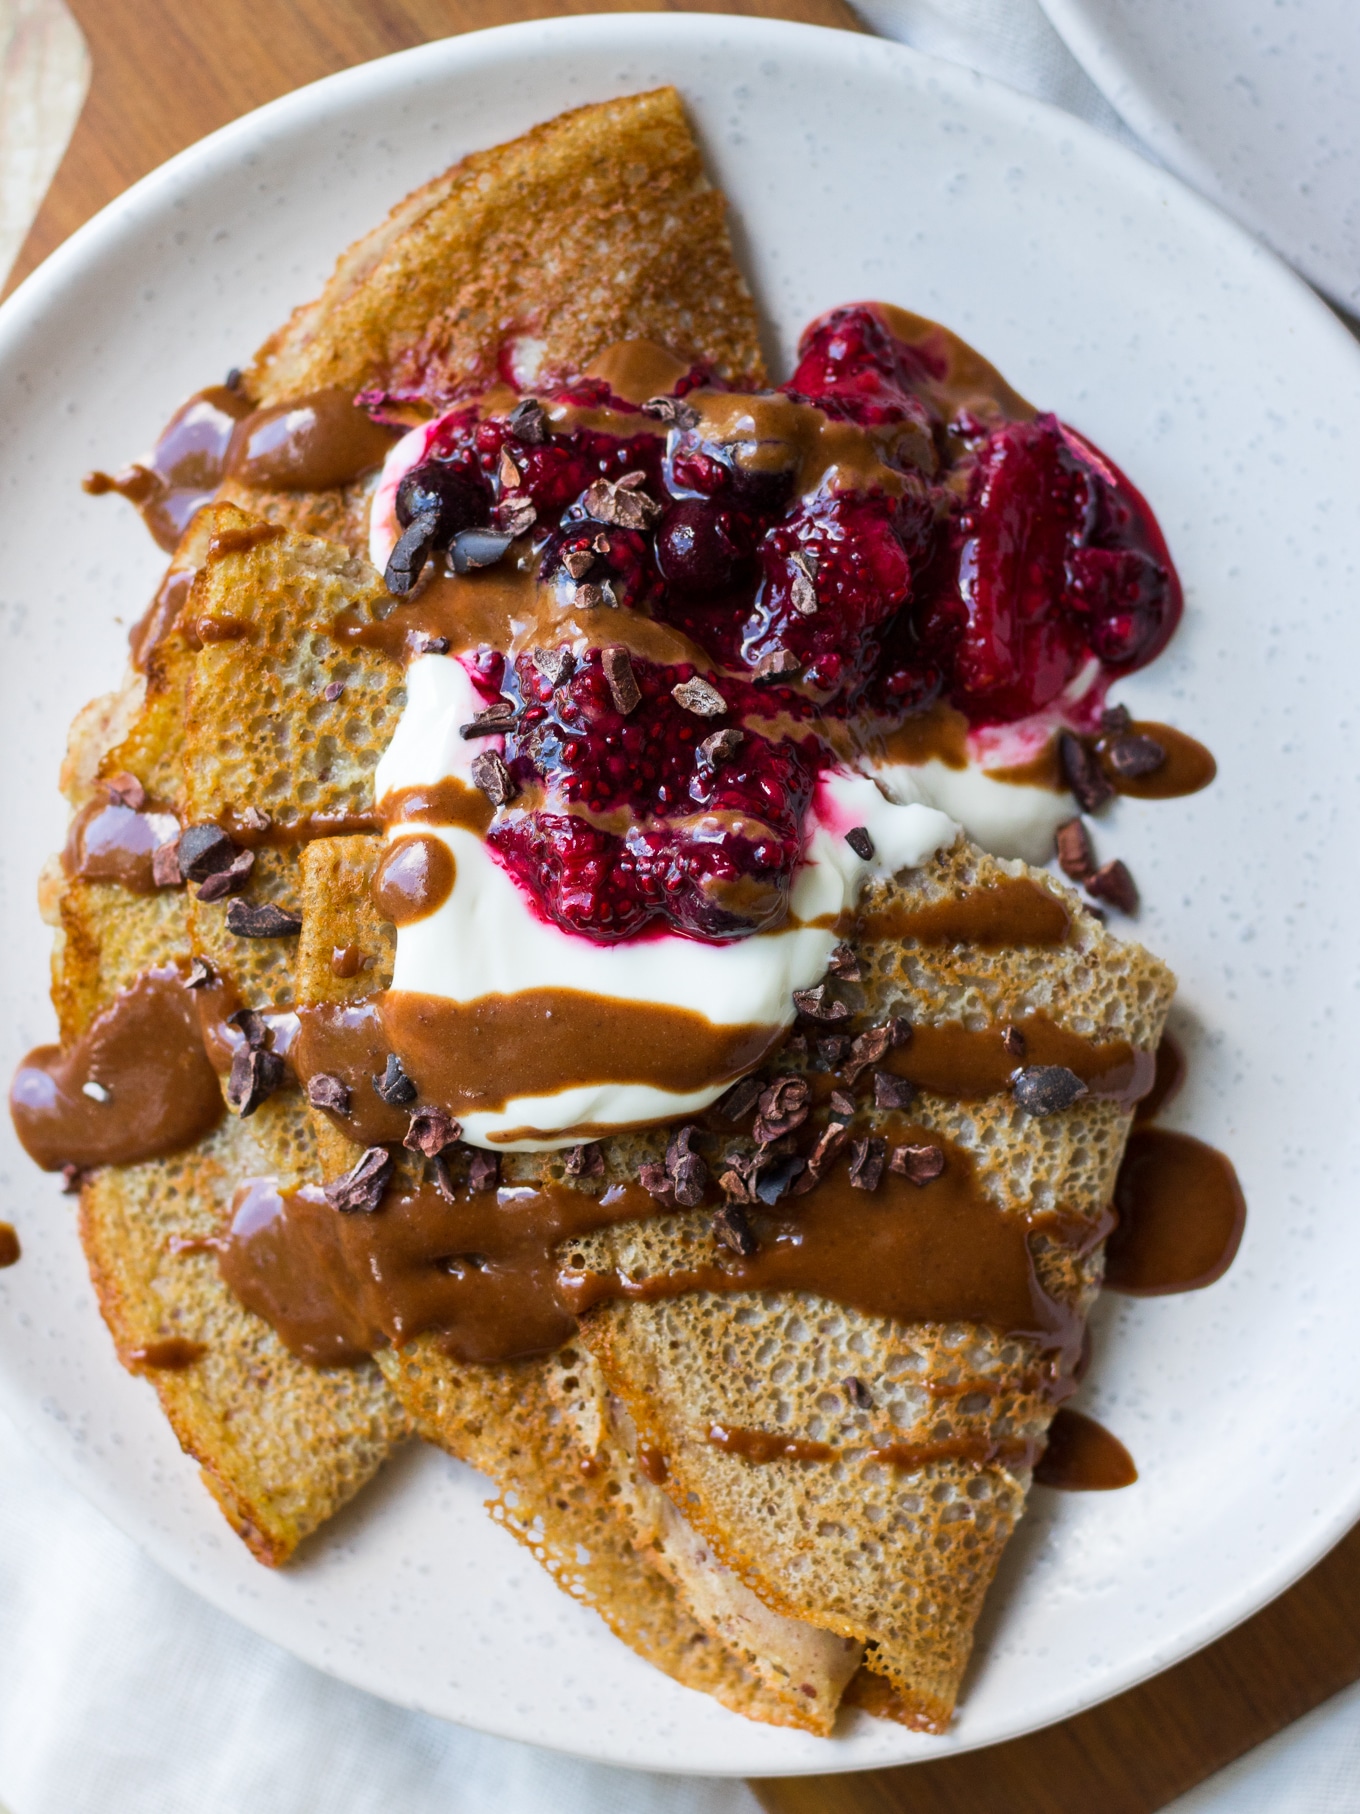 Sweet Vegan Buckwheat Crepes, folded on a white plate, topped with yoghurt, berry sauce, chocolate drizzle.